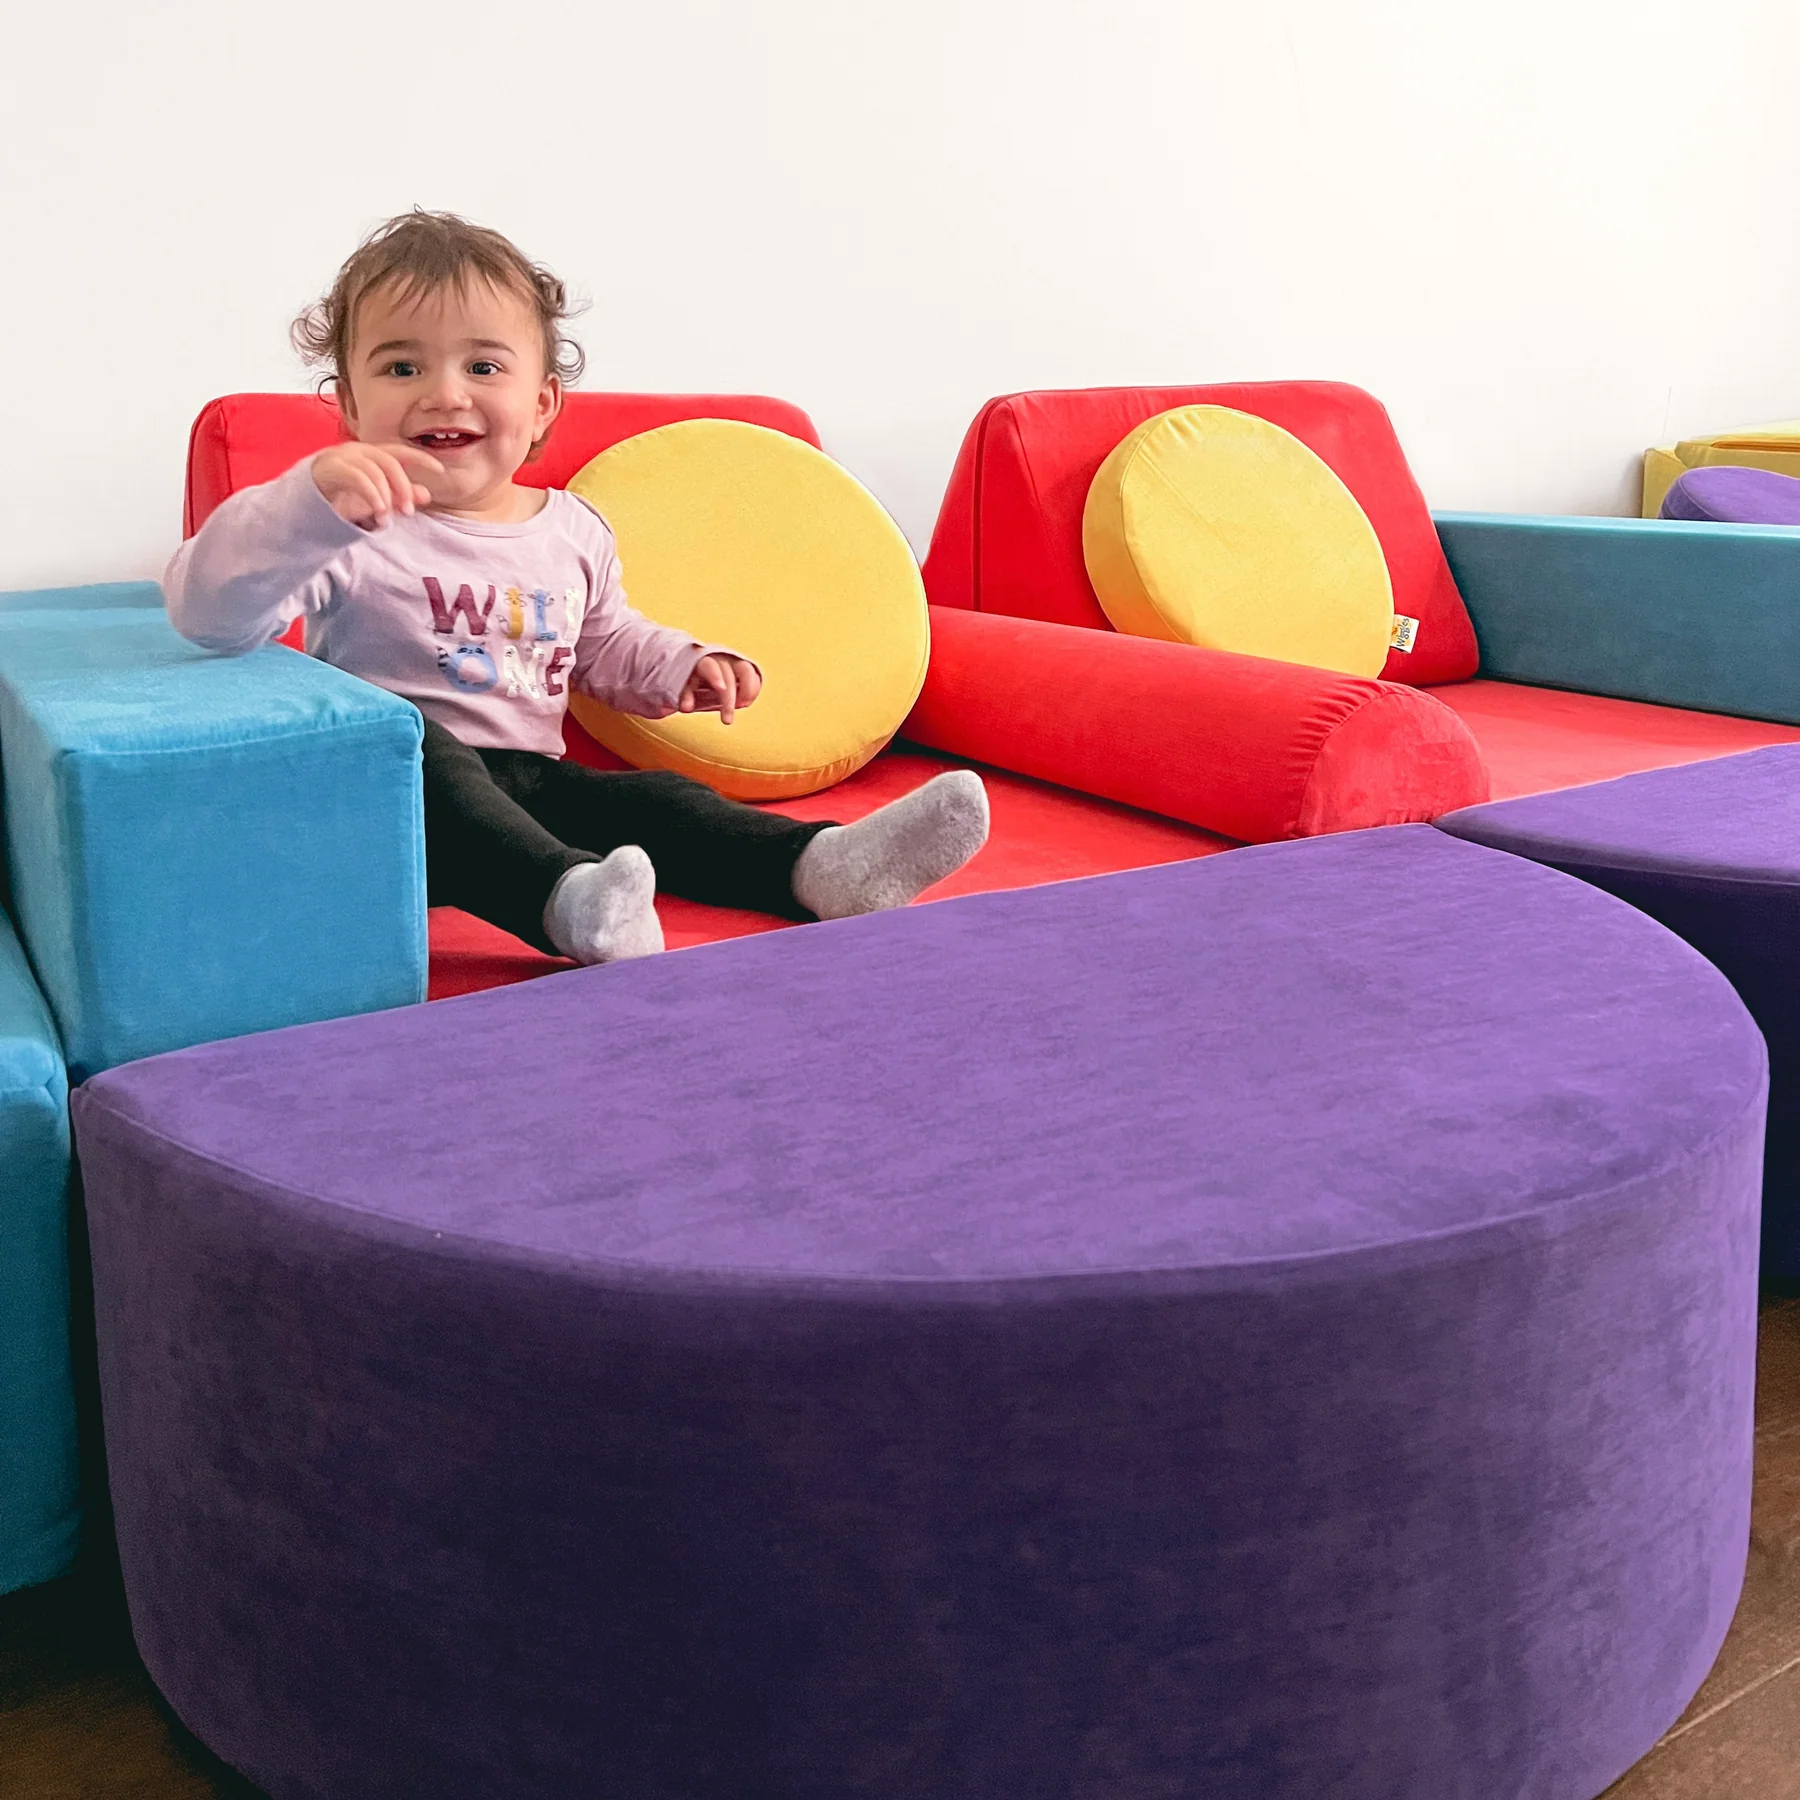 A baby sits in a multi-colored play couch